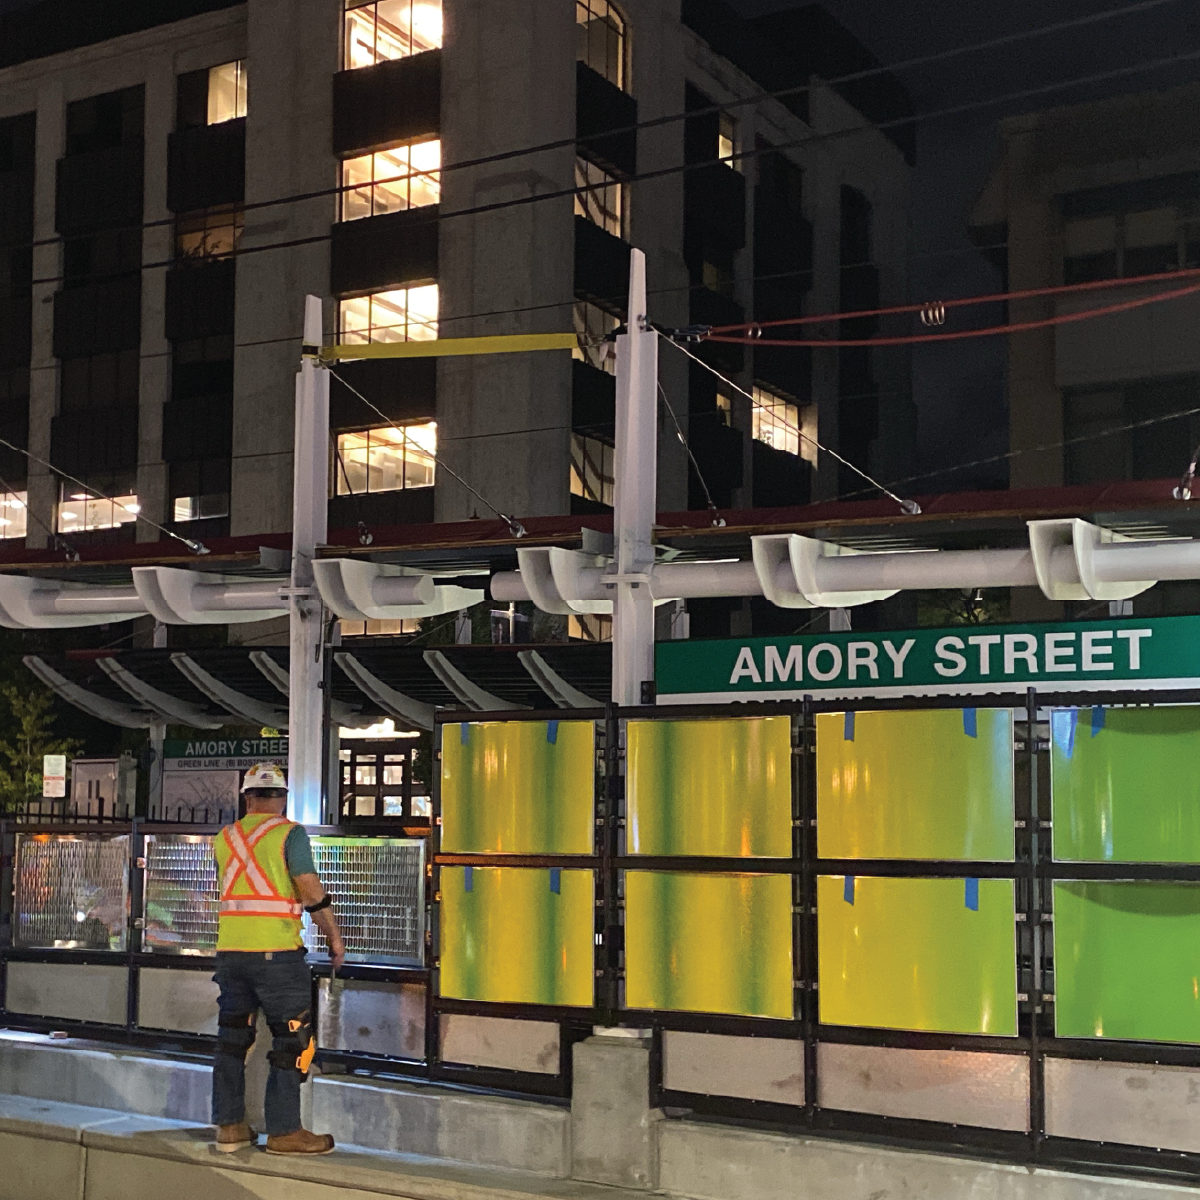 A construction worker in high visibility clothing and a hard hat stands facing the new Amory Street platform at night